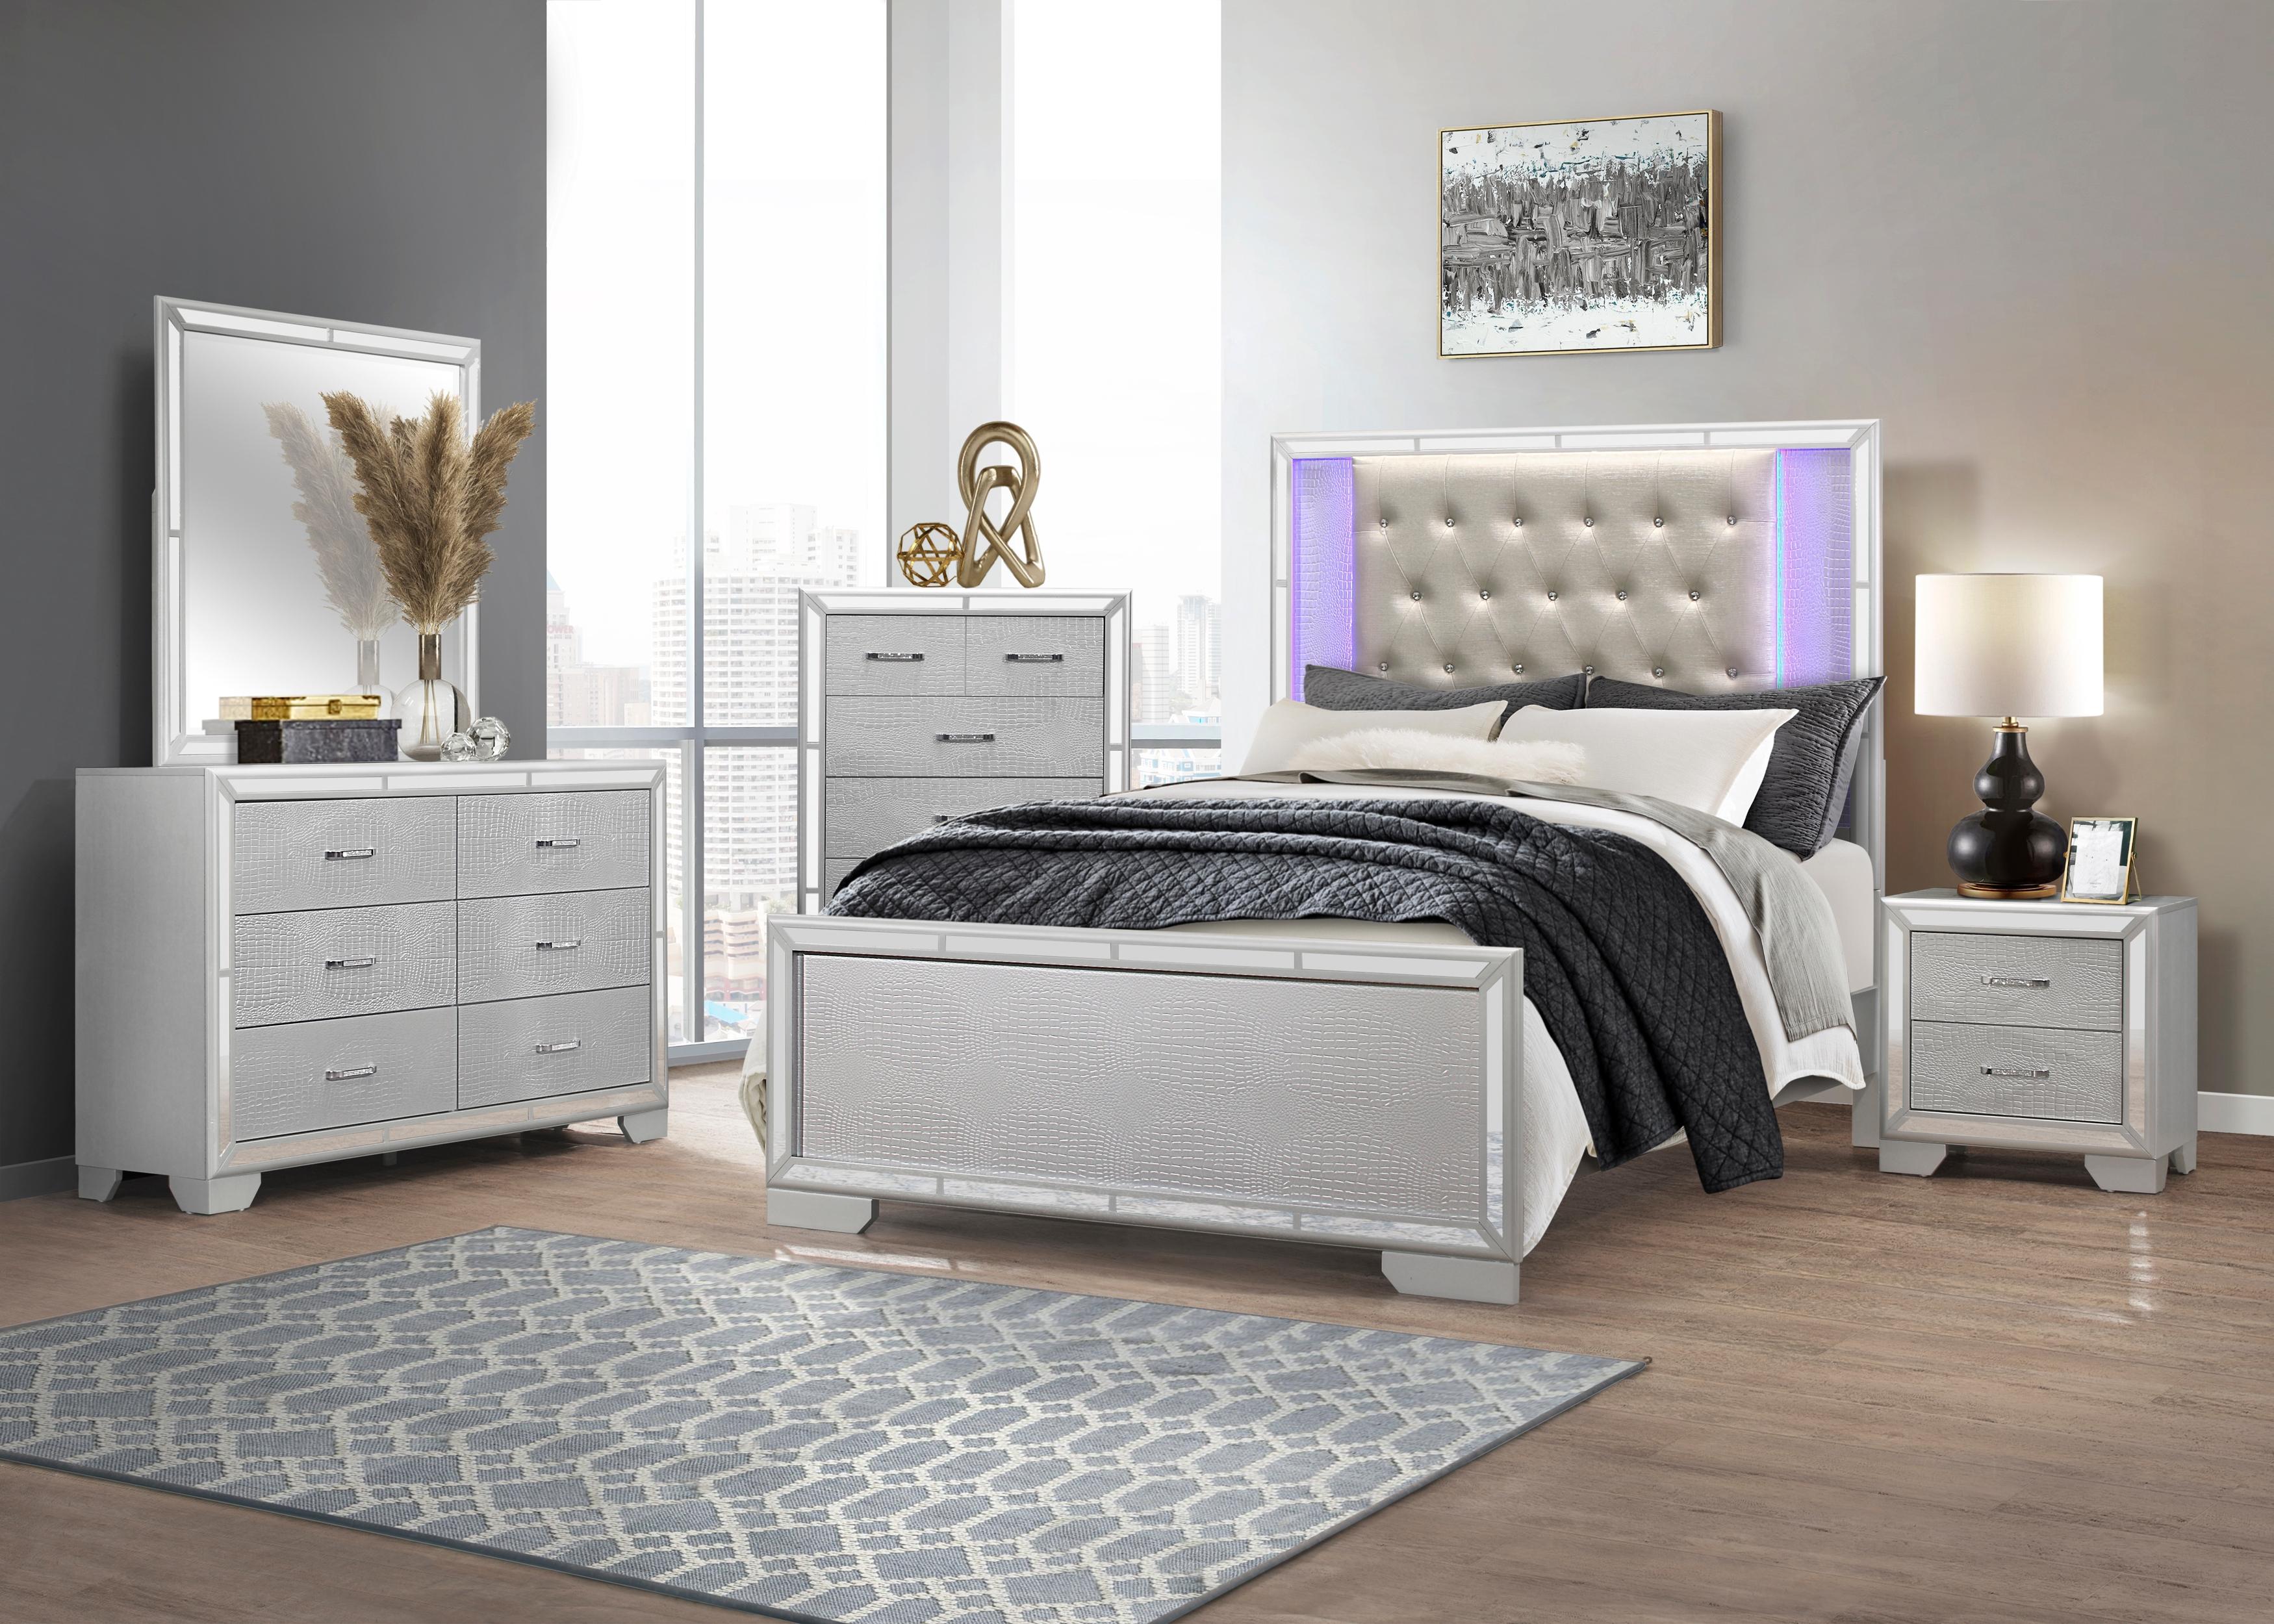 Modern Bedroom Set 1428SV-1-6PC Aveline 1428SV-1-6PC in Silver Faux Leather